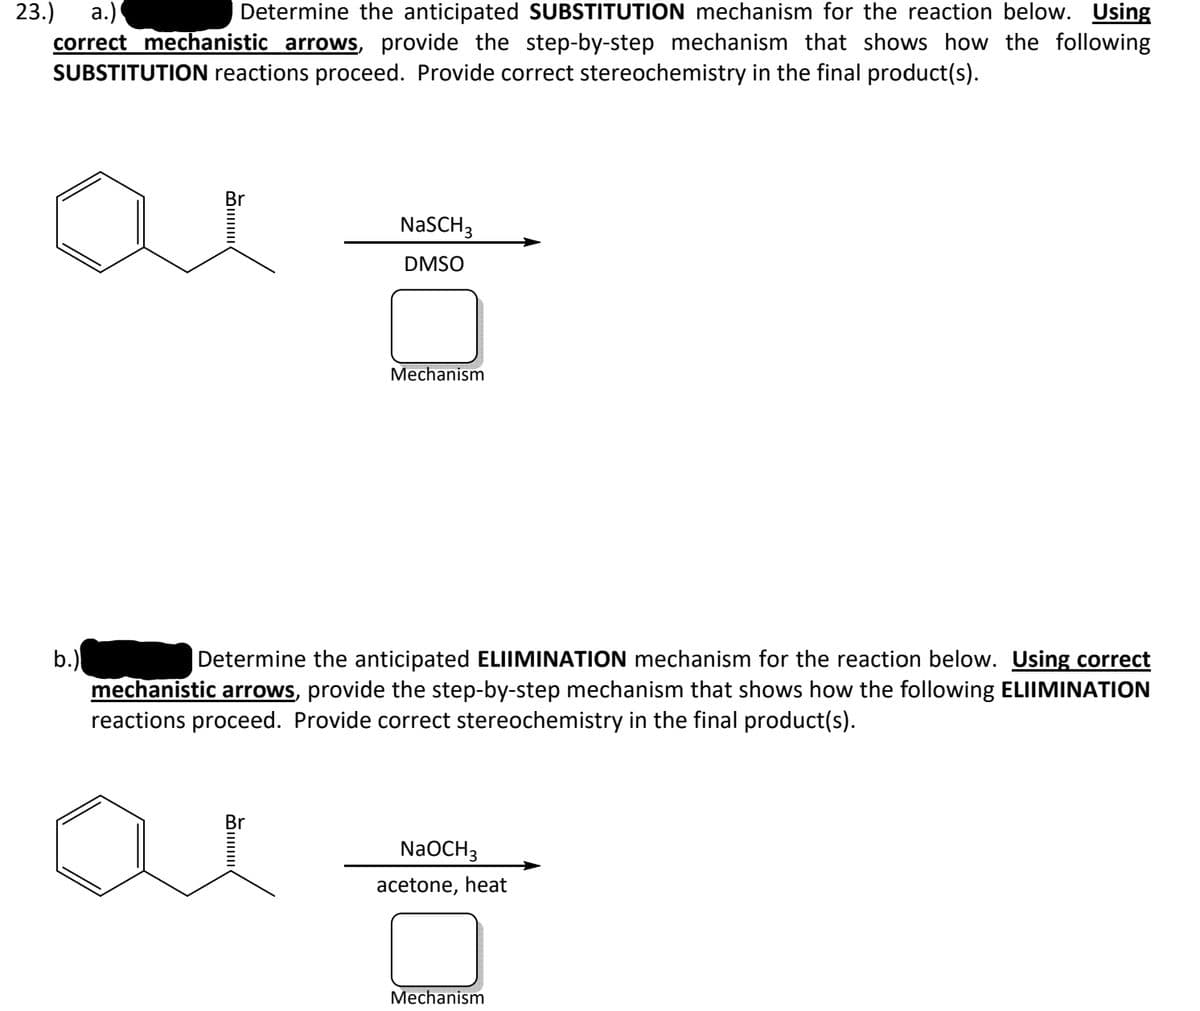 23.)
а.)
correct mechanistic arrows, provide the step-by-step mechanism that shows how the following
SUBSTITUTION reactions proceed. Provide correct stereochemistry in the final product(s).
Determine the anticipated SUBSTITUTION mechanism for the reaction below. Using
Br
NaSCH3
DMSO
Mechanism
b.)
mechanistic arrows, provide the step-by-step mechanism that shows how the following ELIIMINATION
reactions proceed. Provide correct stereochemistry in the final product(s).
Determine the anticipated ELIIMINATION mechanism for the reaction below. Using correct
Br
NaOCH3
acetone, heat
Mechanism
